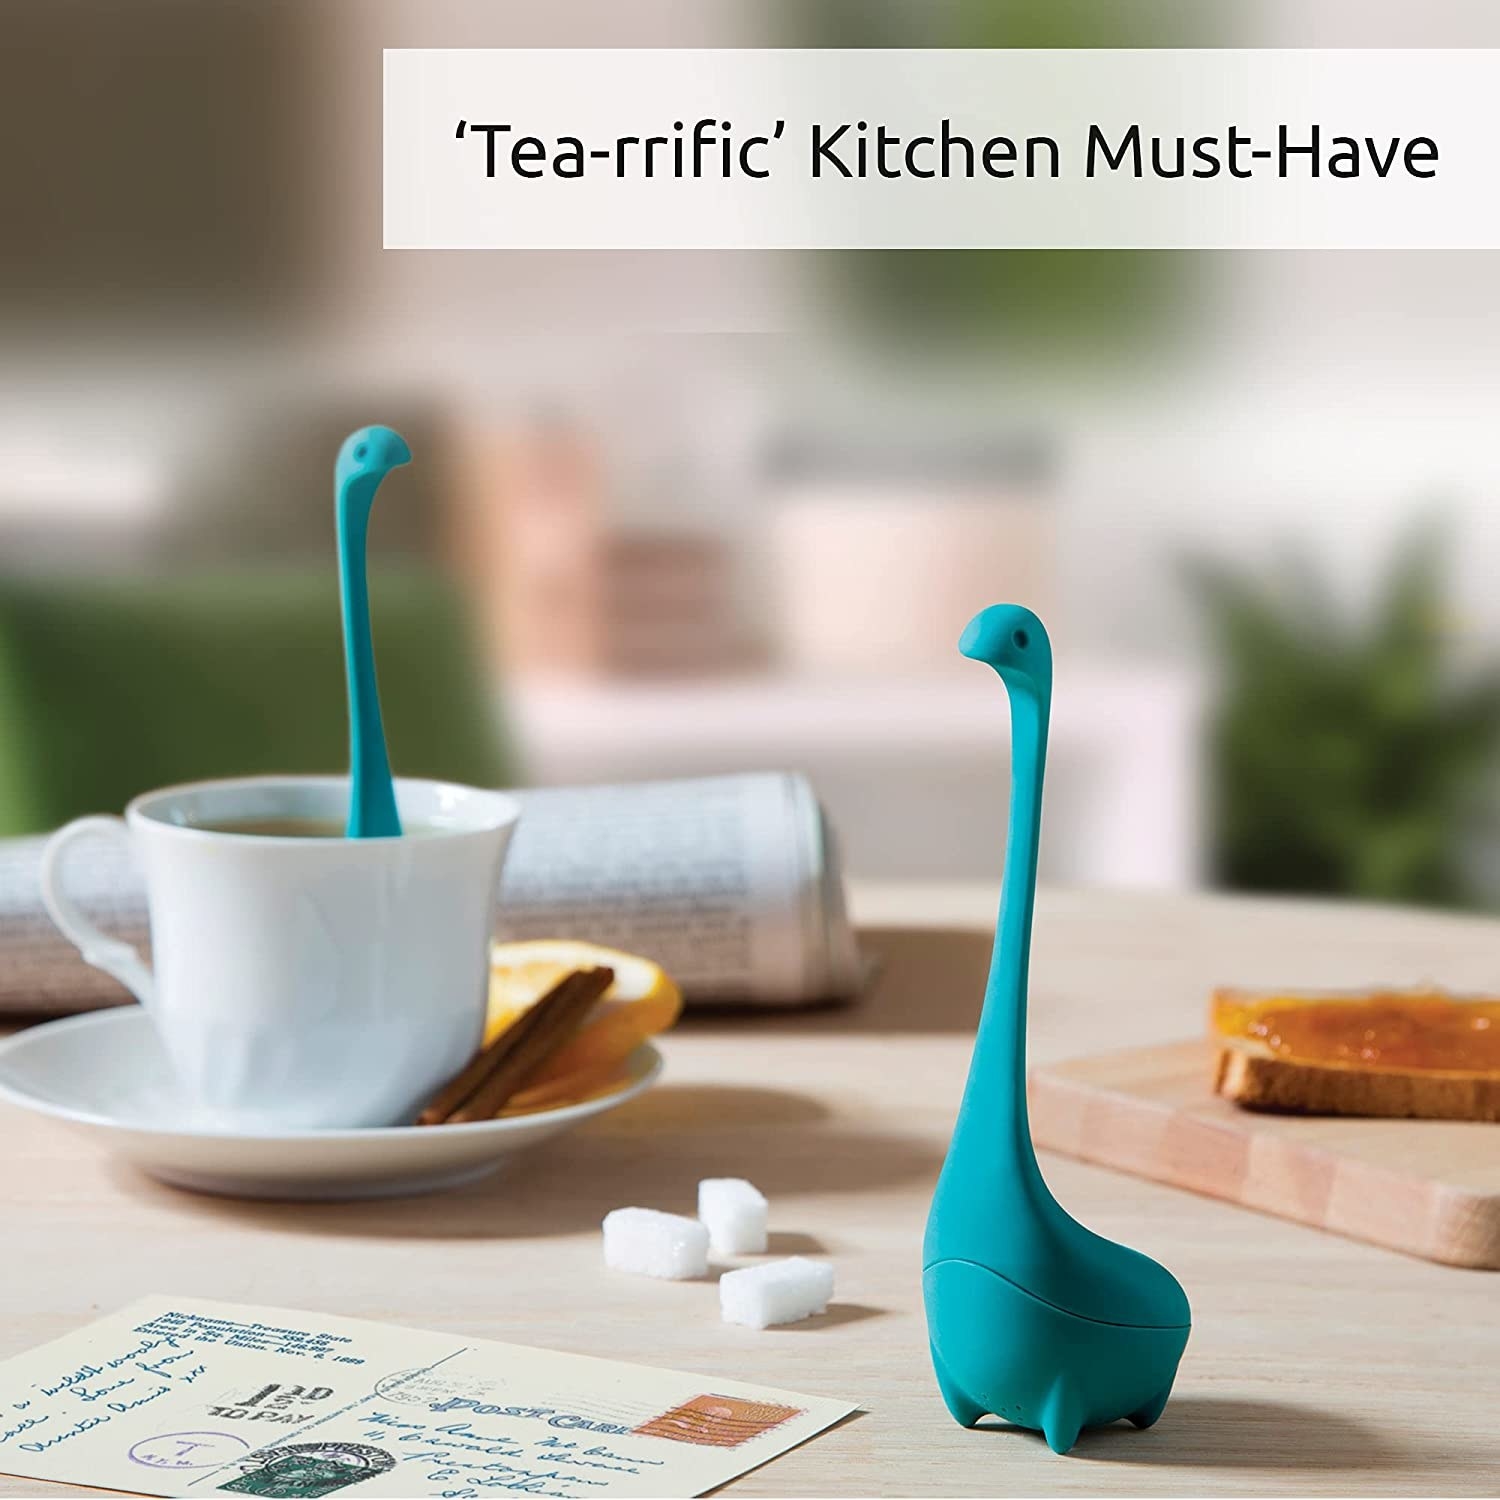 The teal infuser in a cup of tea